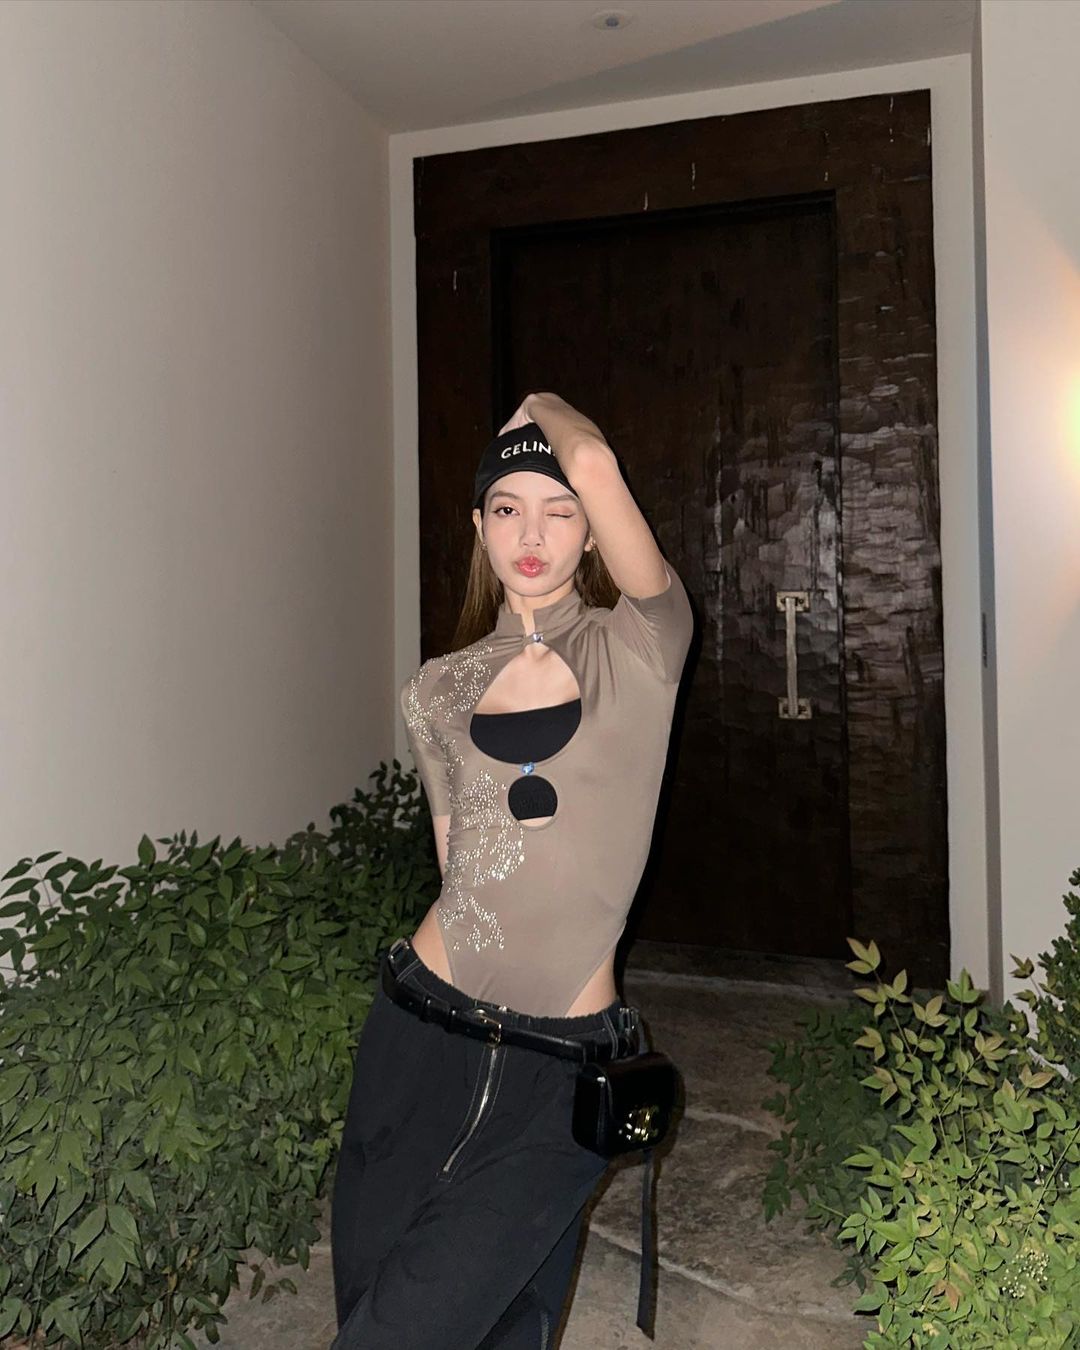 LISA FROM BLACKPINK WEARS THE DAISY BODYSUIT IN TOBACCO BROWN